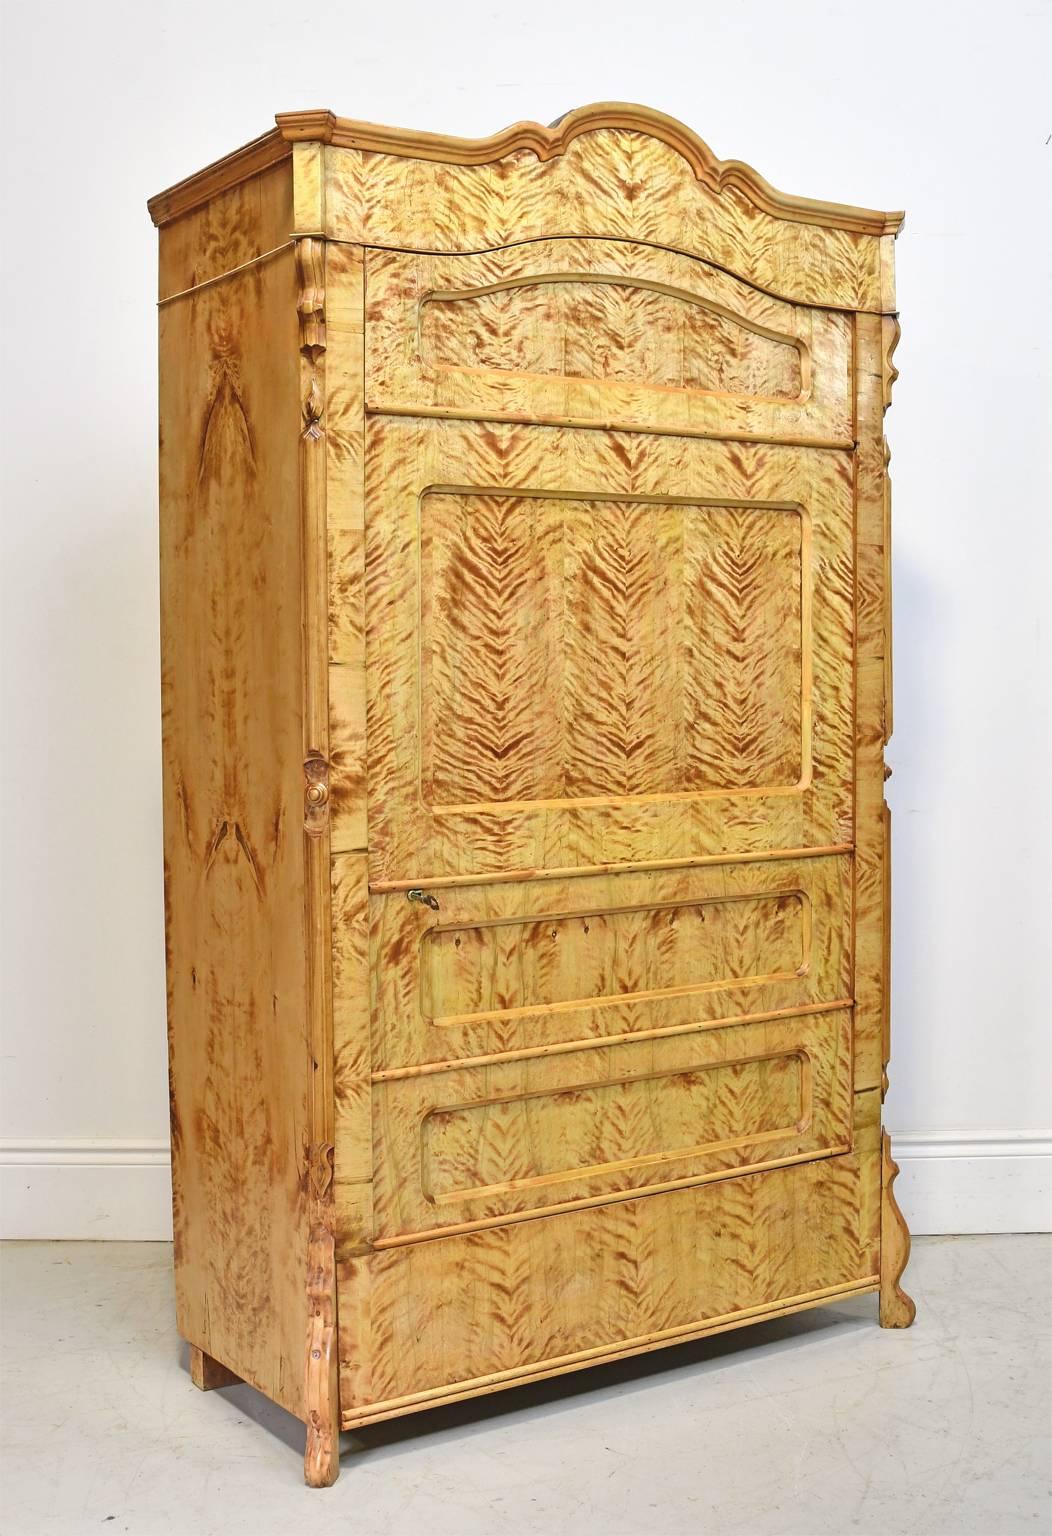 A very beautiful Biedermeier armoire or cabinet in a honey-colored fire birch that has been expertly book-matched throughout to showcase the singular beauty of its grain. The faux front of the single door is paneled to give the illusion of a